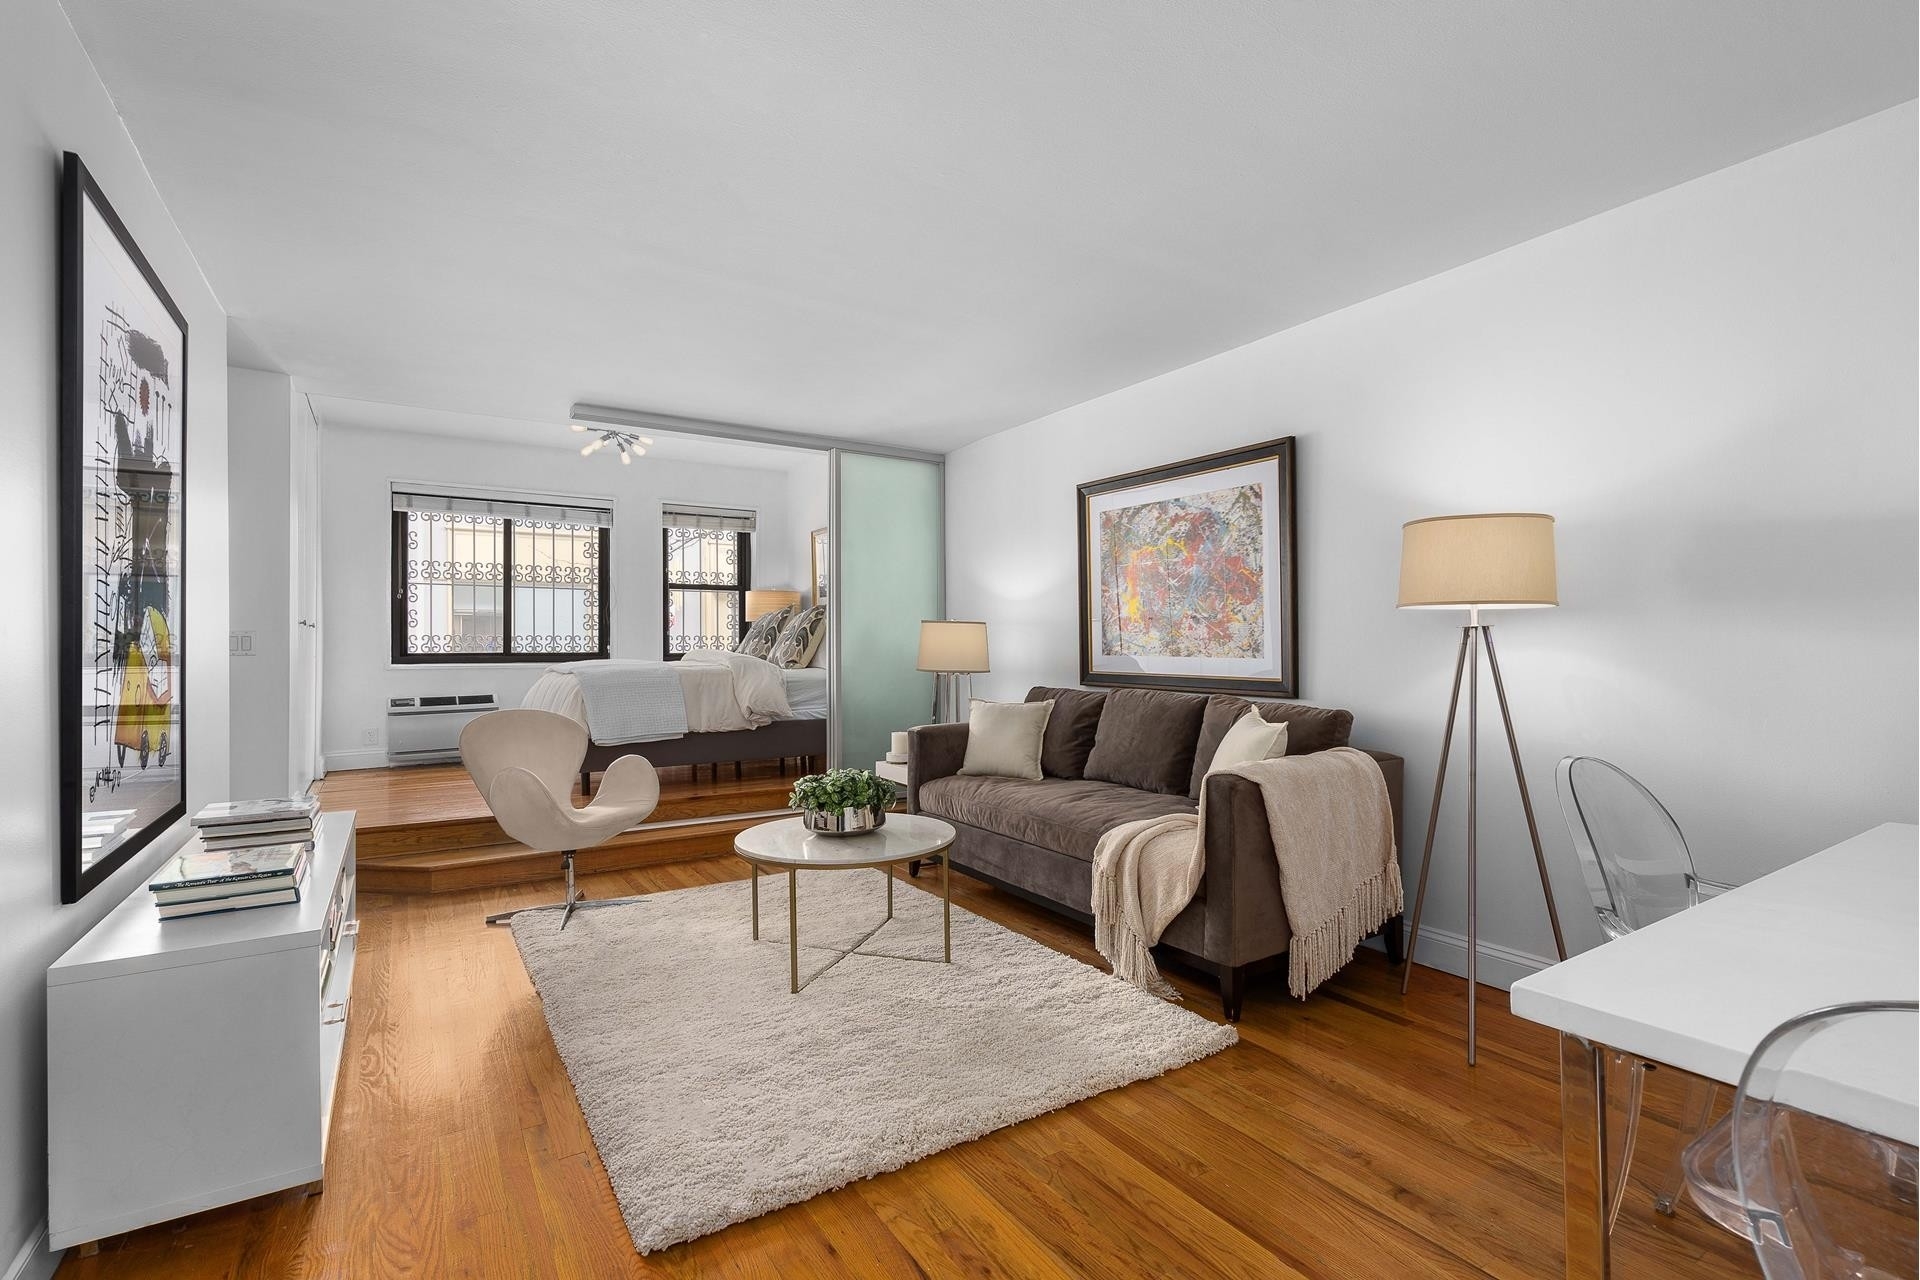 Co-op Properties for Sale at The Thomas Eddy, 85 EIGHTH AVE, 1J Chelsea, New York, NY 10011